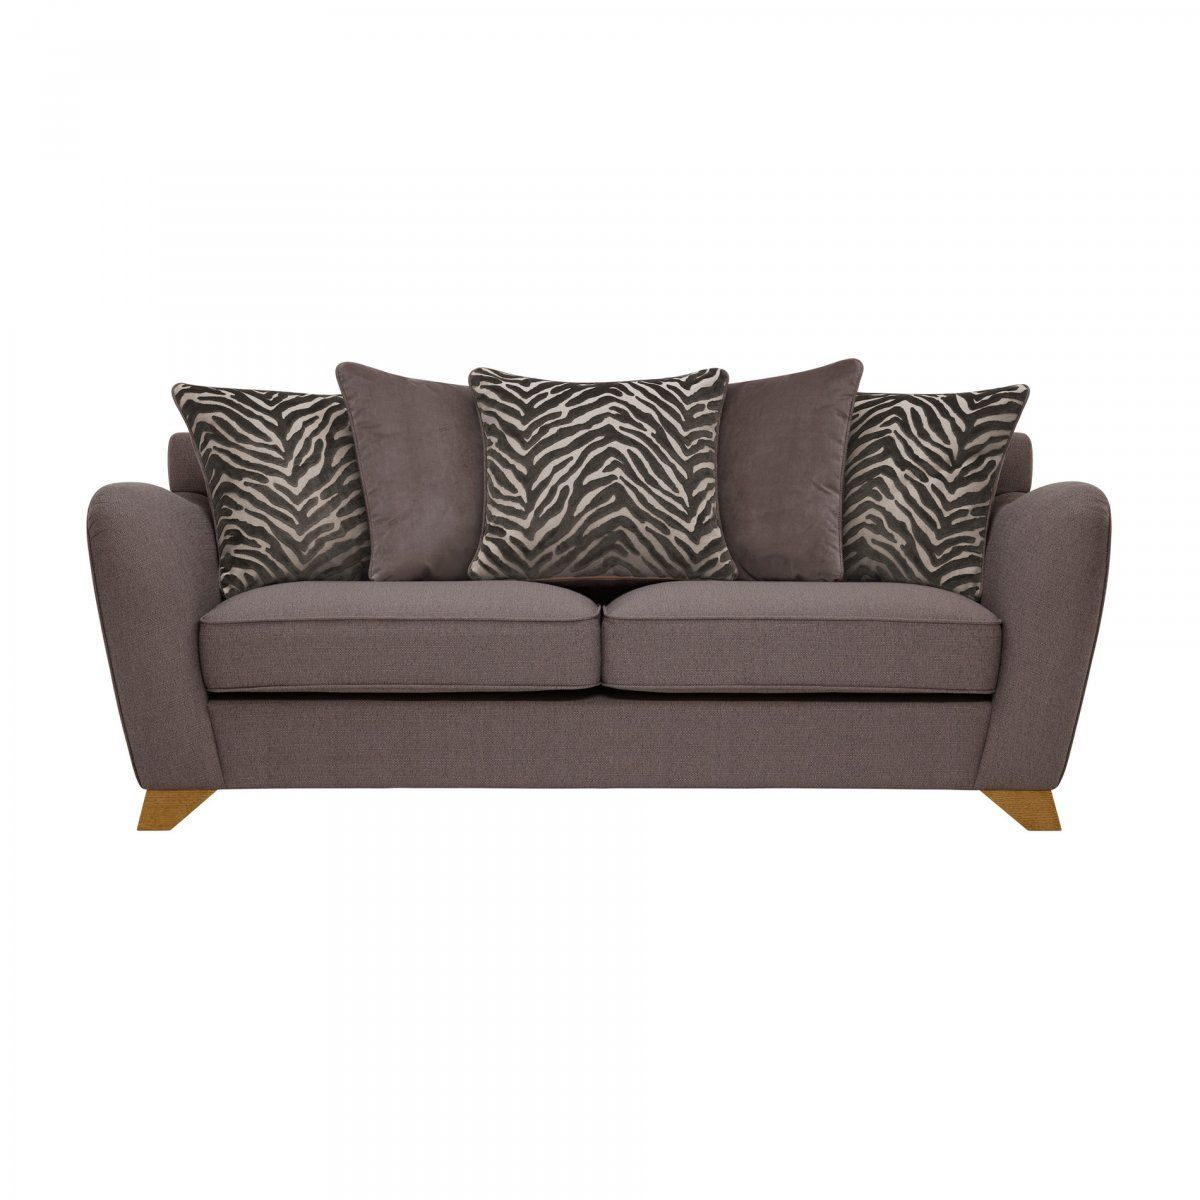 Abbey Traditional Pillow Back 3 Seater Fabric Sofa Regarding Traditional 3 Seater Sofas (View 15 of 20)